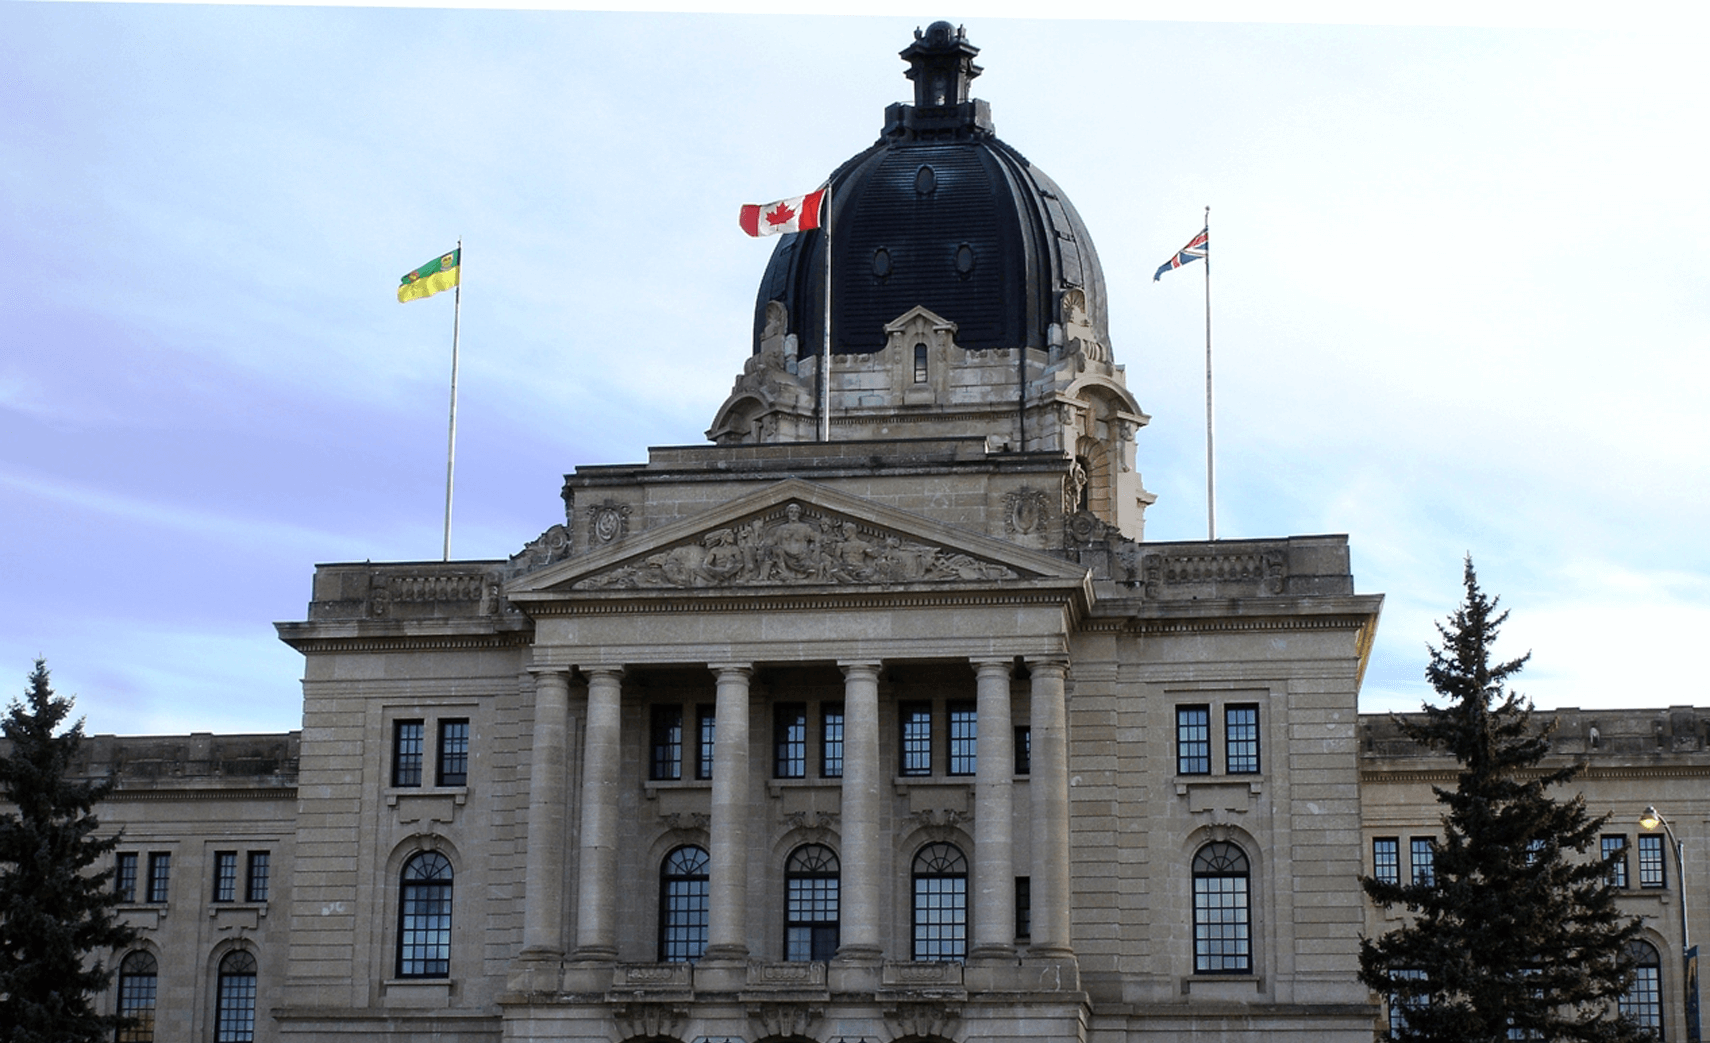 Sask Party shows double standard toward public workers with MLA wage increase